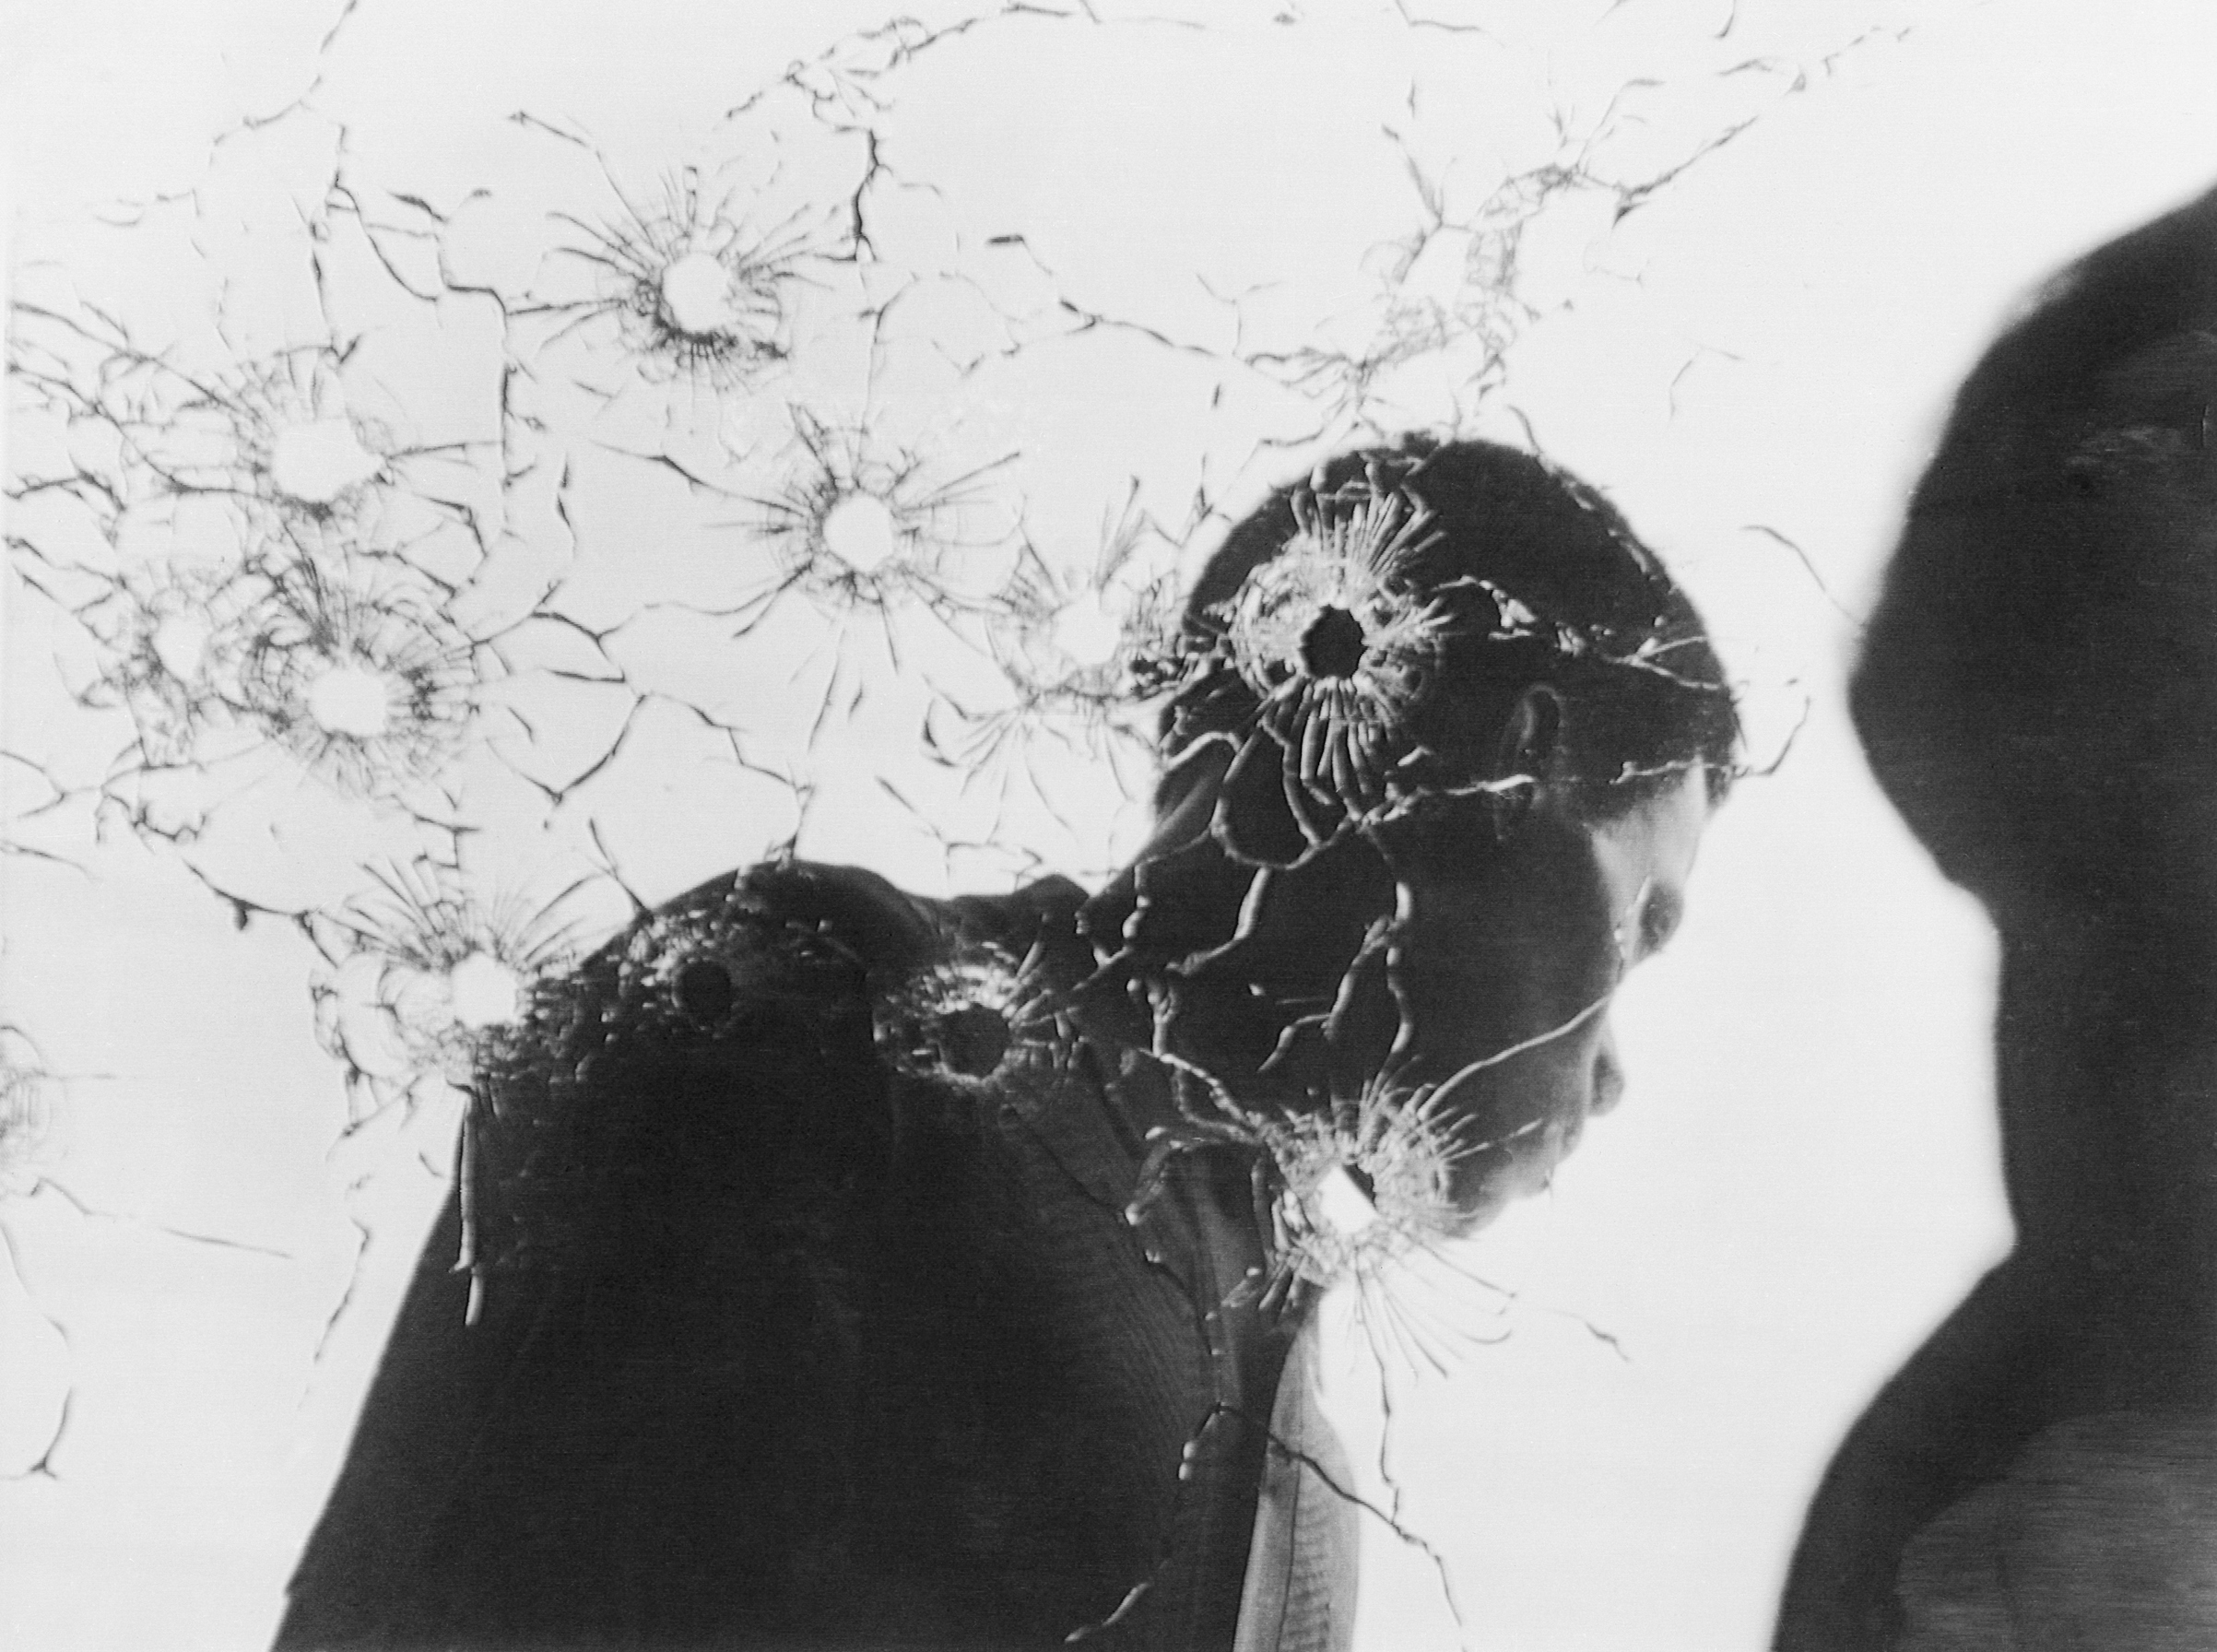 May 16, 1970 - Jackson, Miss: A man stands behind the shattered window of a women's dormitory following the fatal shooting of two students at Jackson State College. (Bettmann Archive)